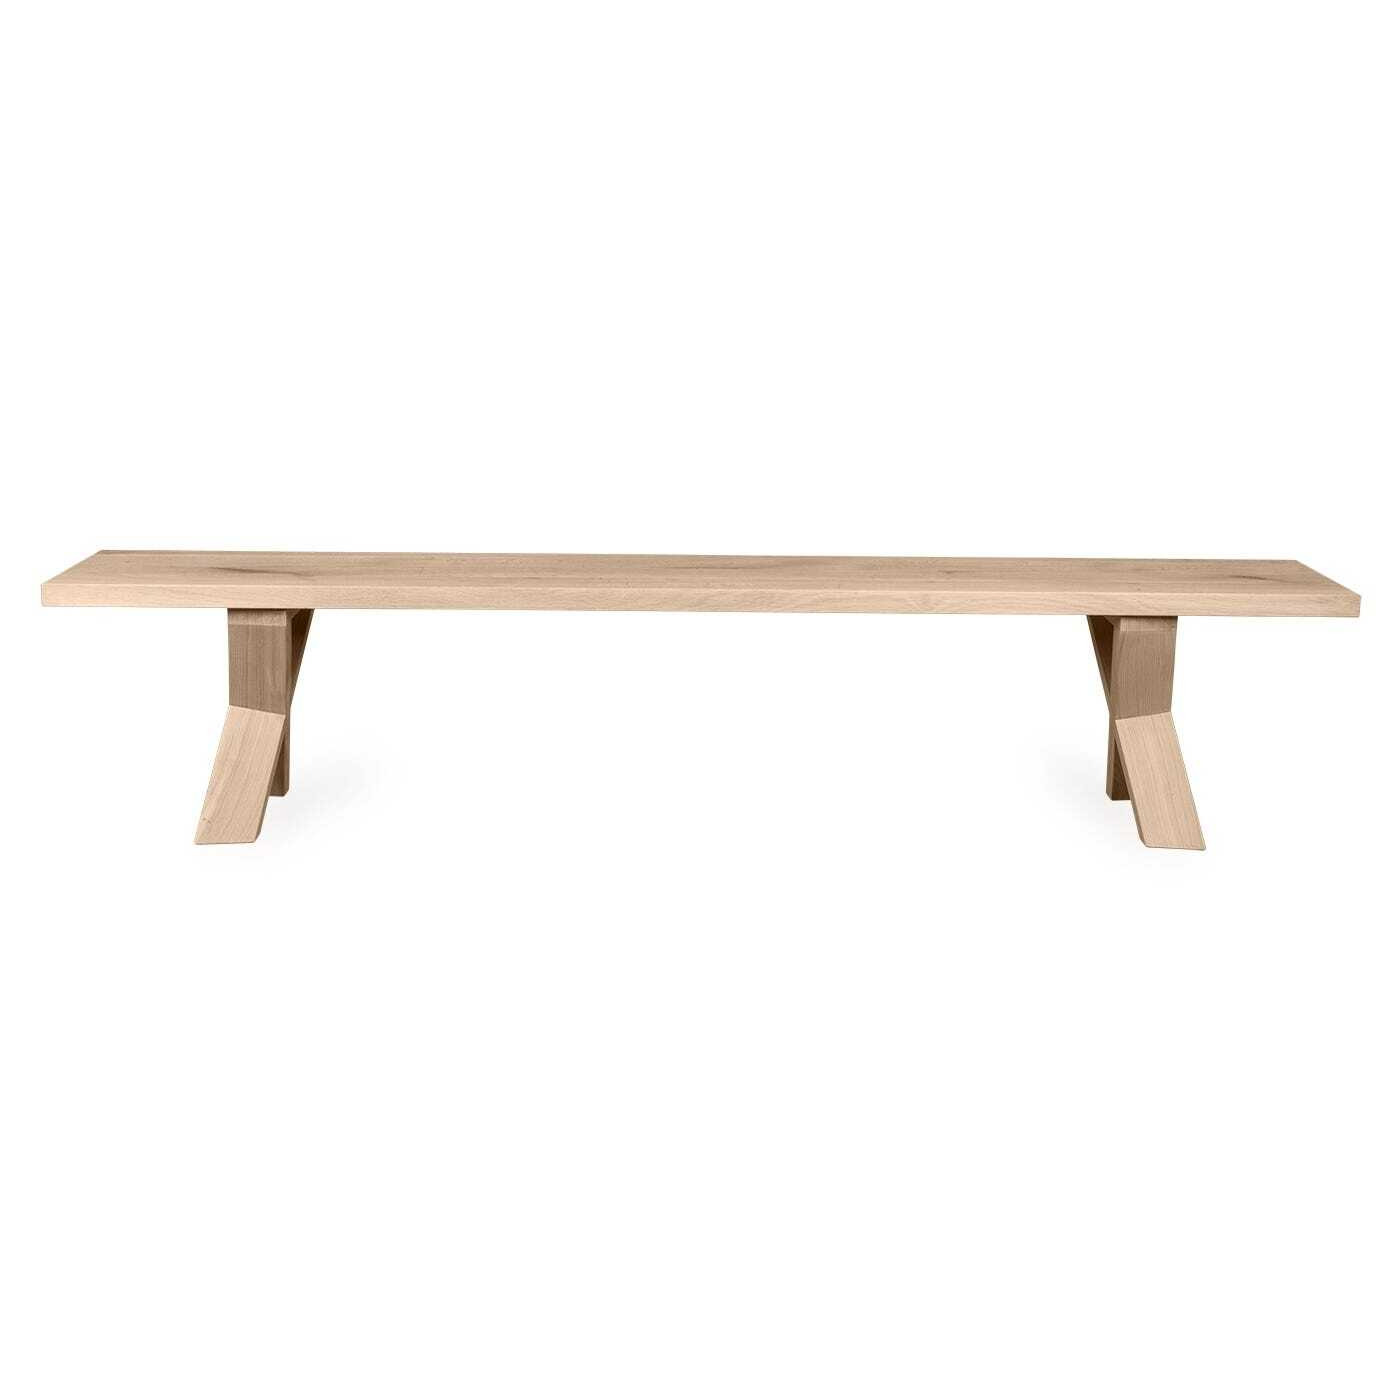 Heal's Oslo Bench 160x35cm Grey Oiled Oak Natural Edge Not Filled